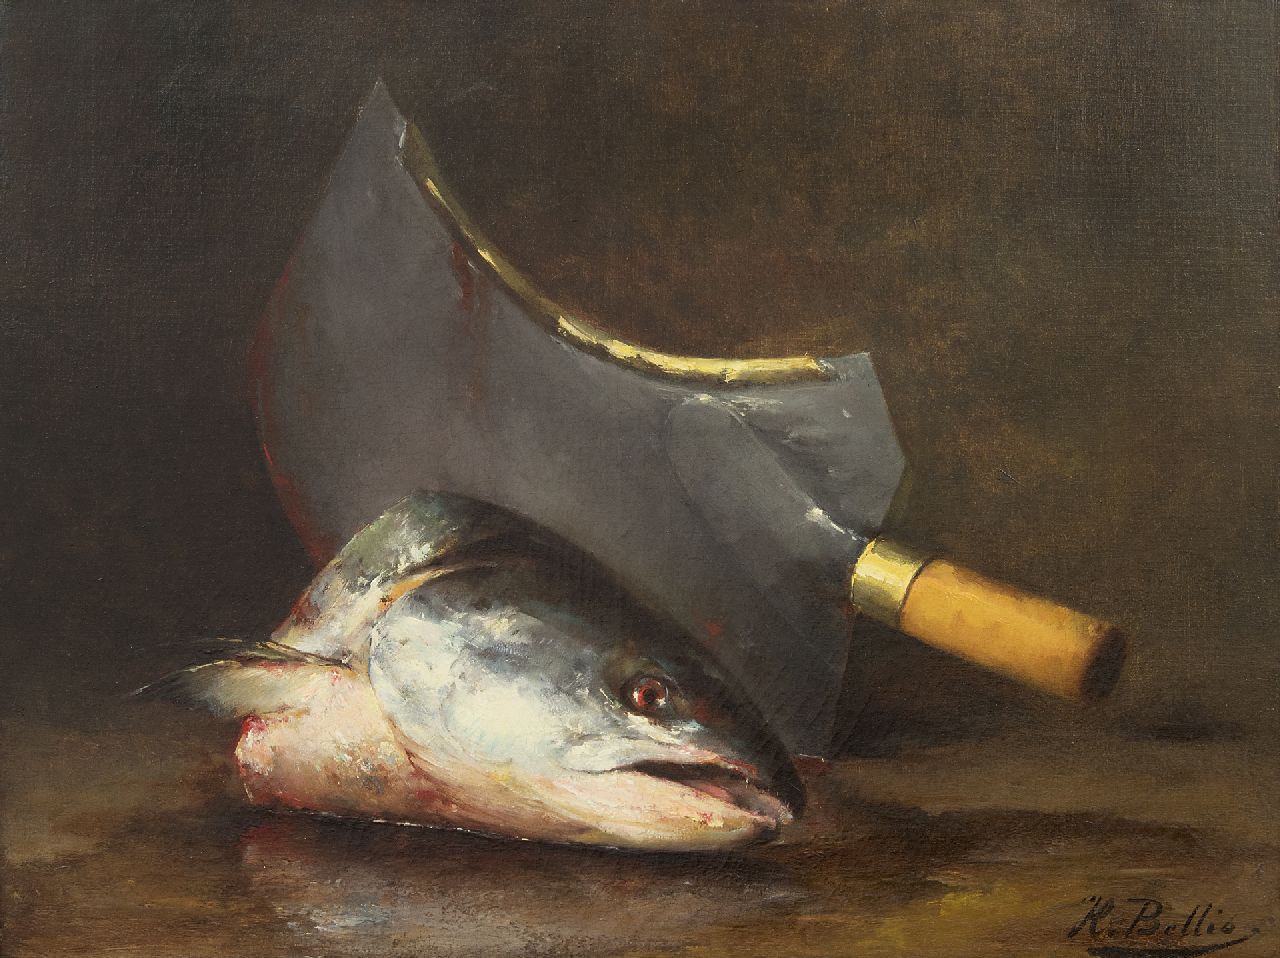 Hubert Bellis | A still life with a fish head and cleaver, oil on canvas, 47.2 x 63.0 cm, signed l.r.